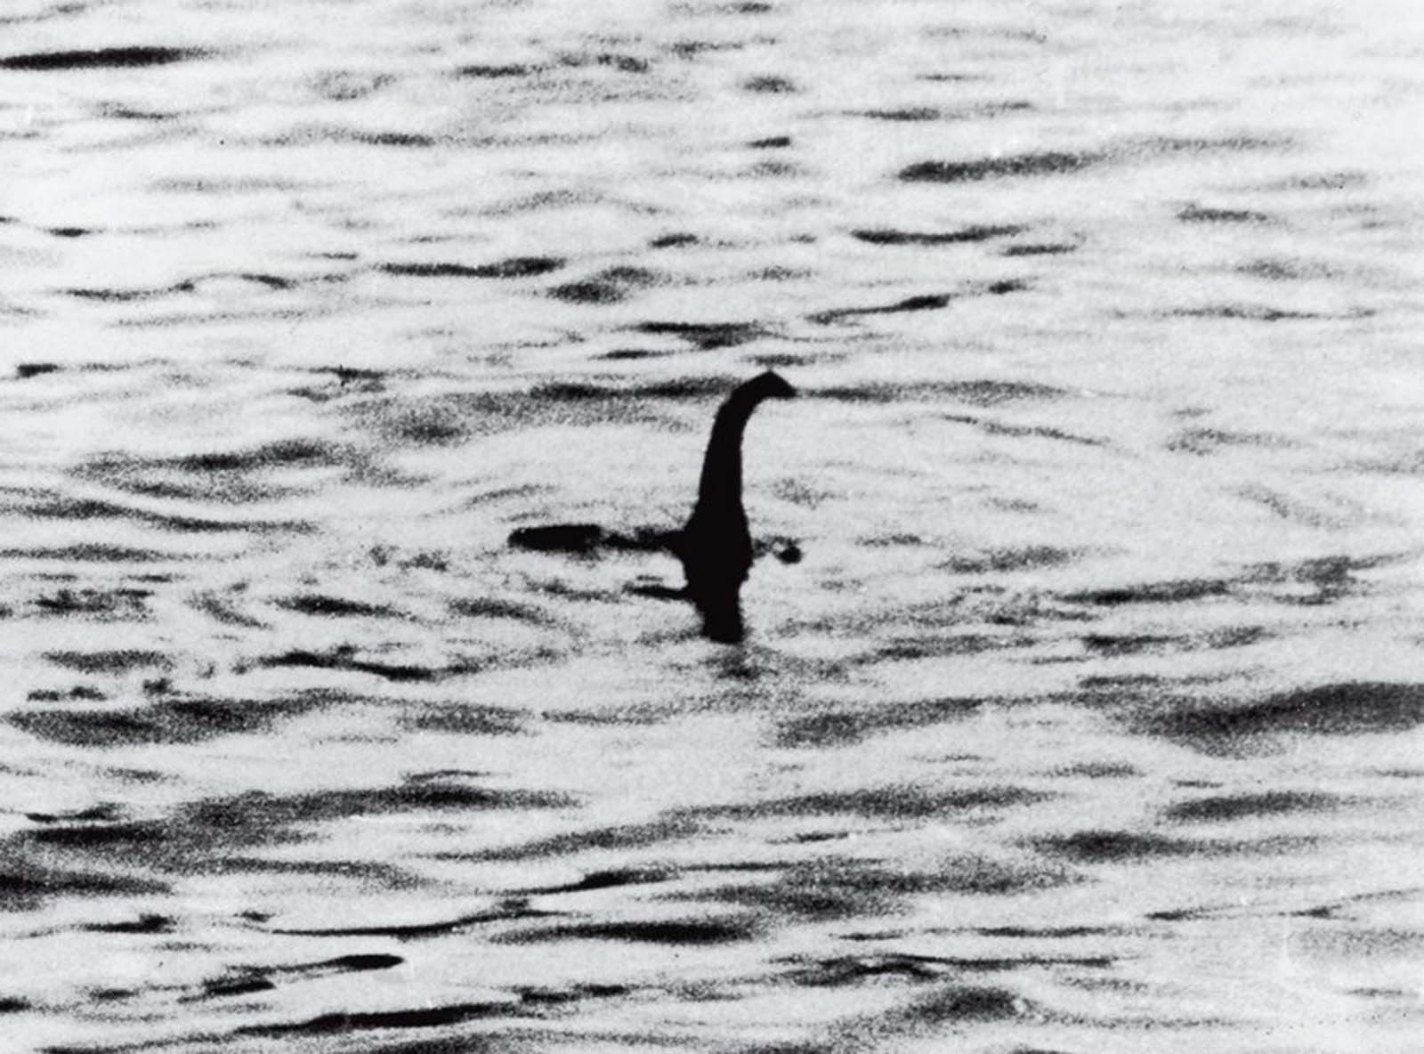 The Loch Ness Monster, Unknown, 1934